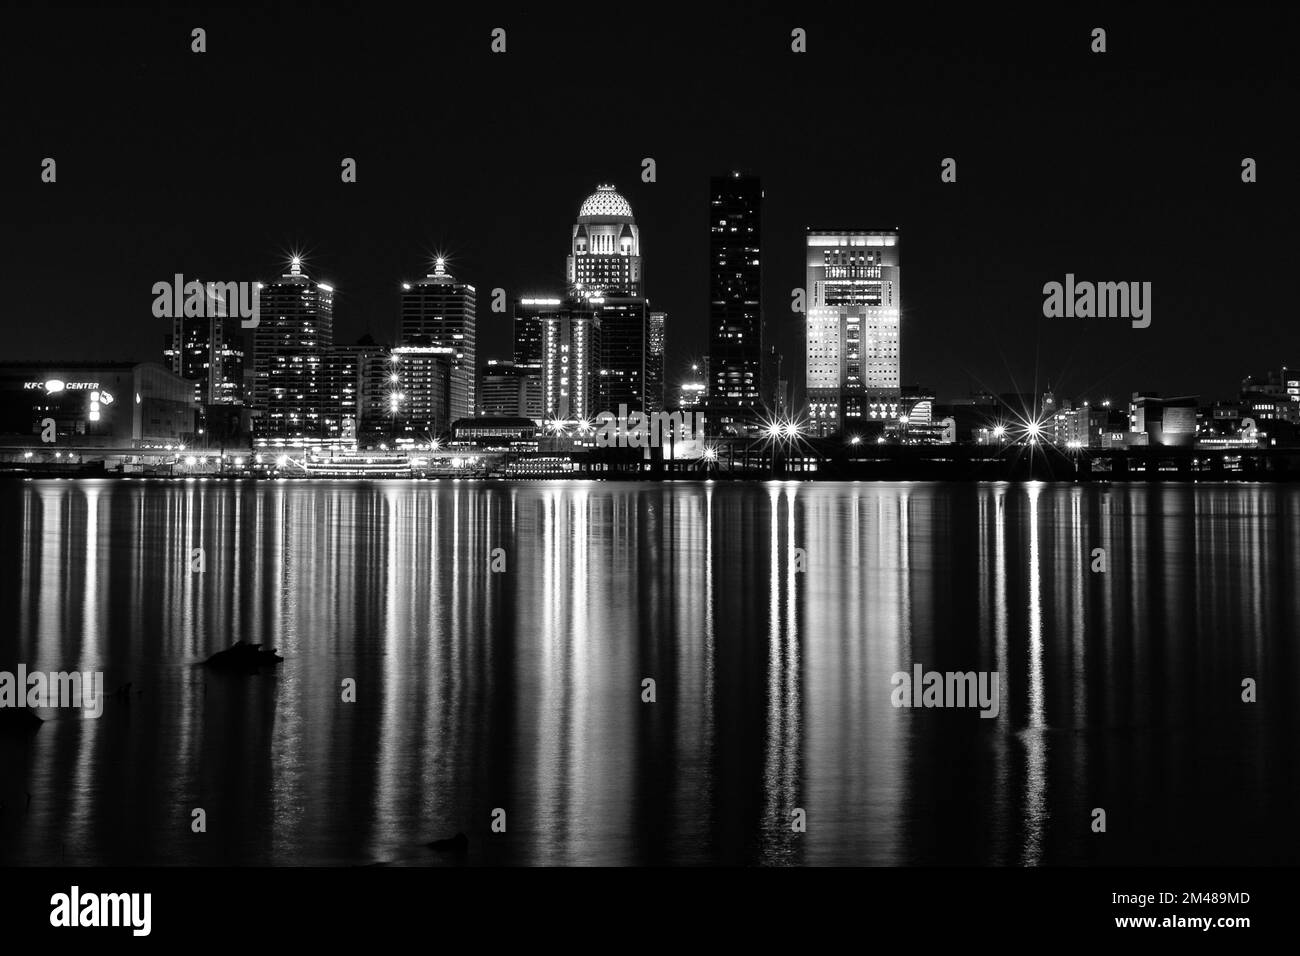 Louisville kentucky skyline Black and White Stock Photos & Images - Alamy